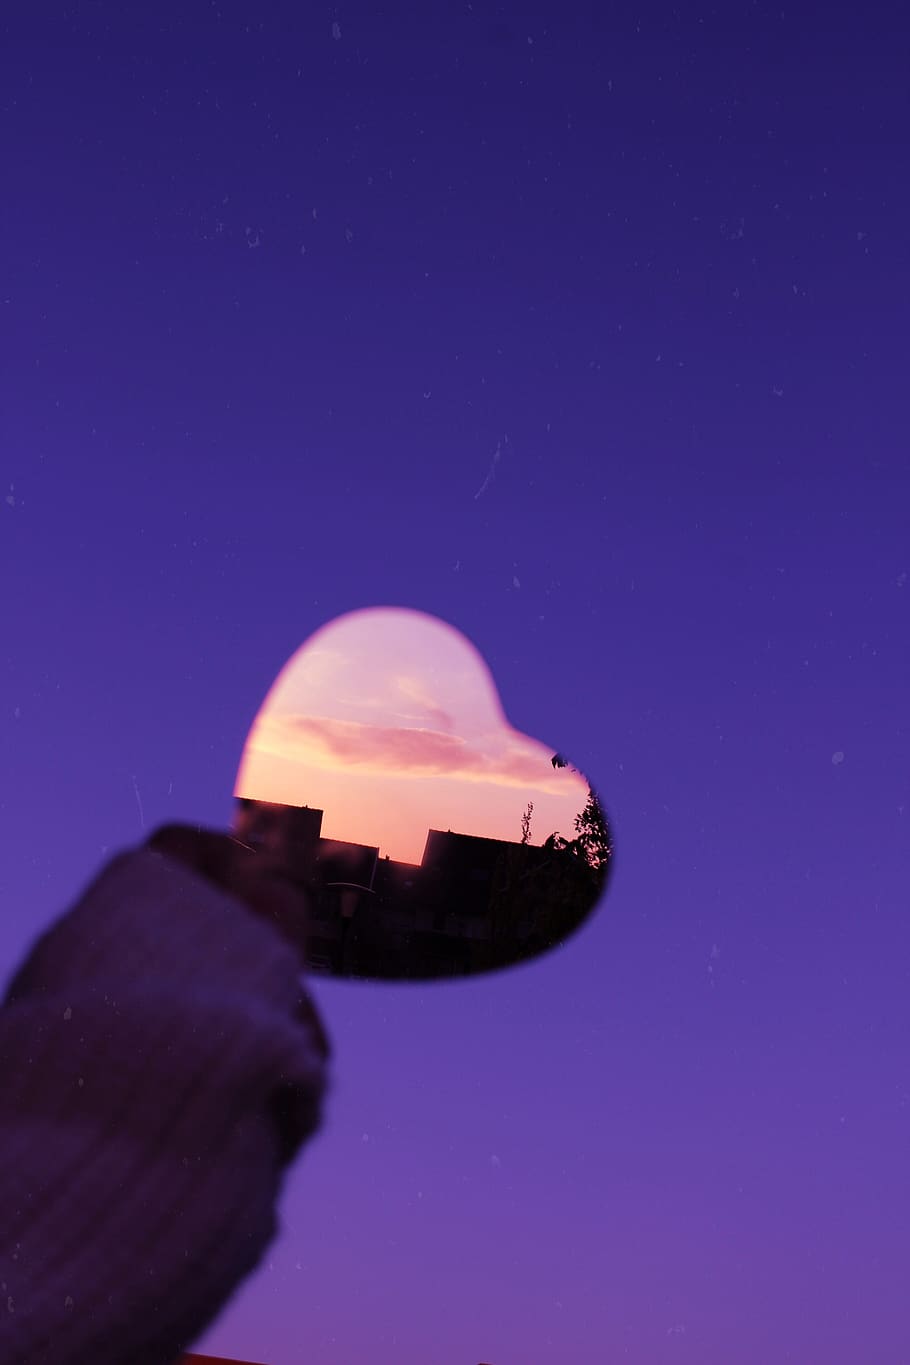 A heart-shaped mirror reflecting a sunset sky - Neon orange